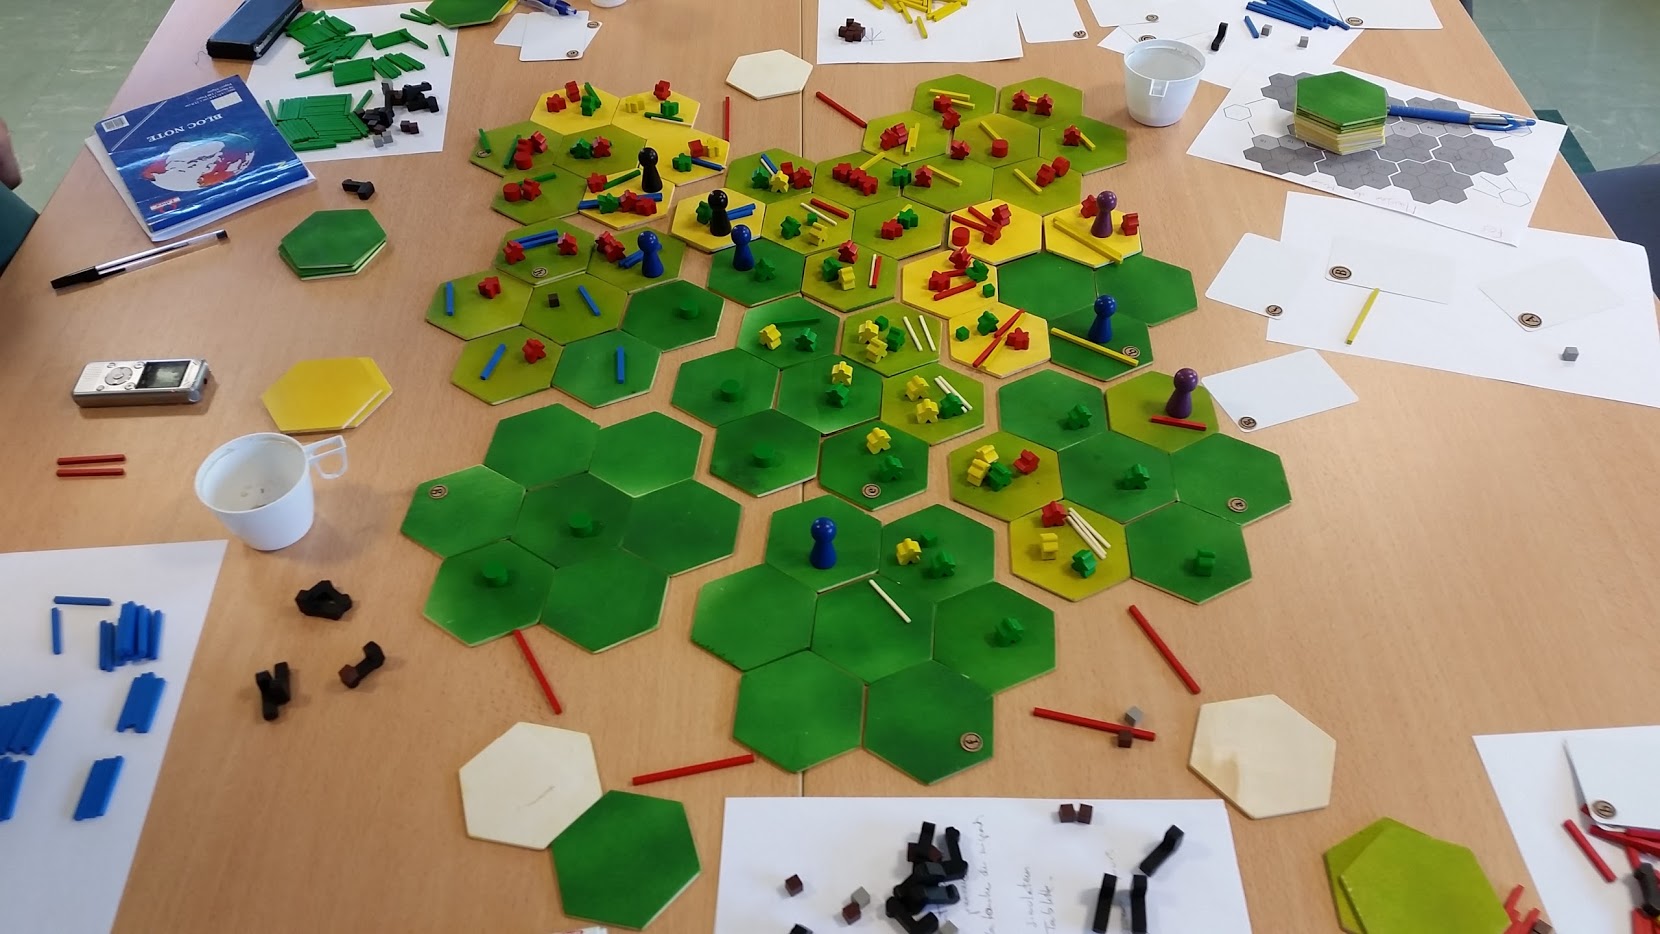 Enlarged view: The MineSet board